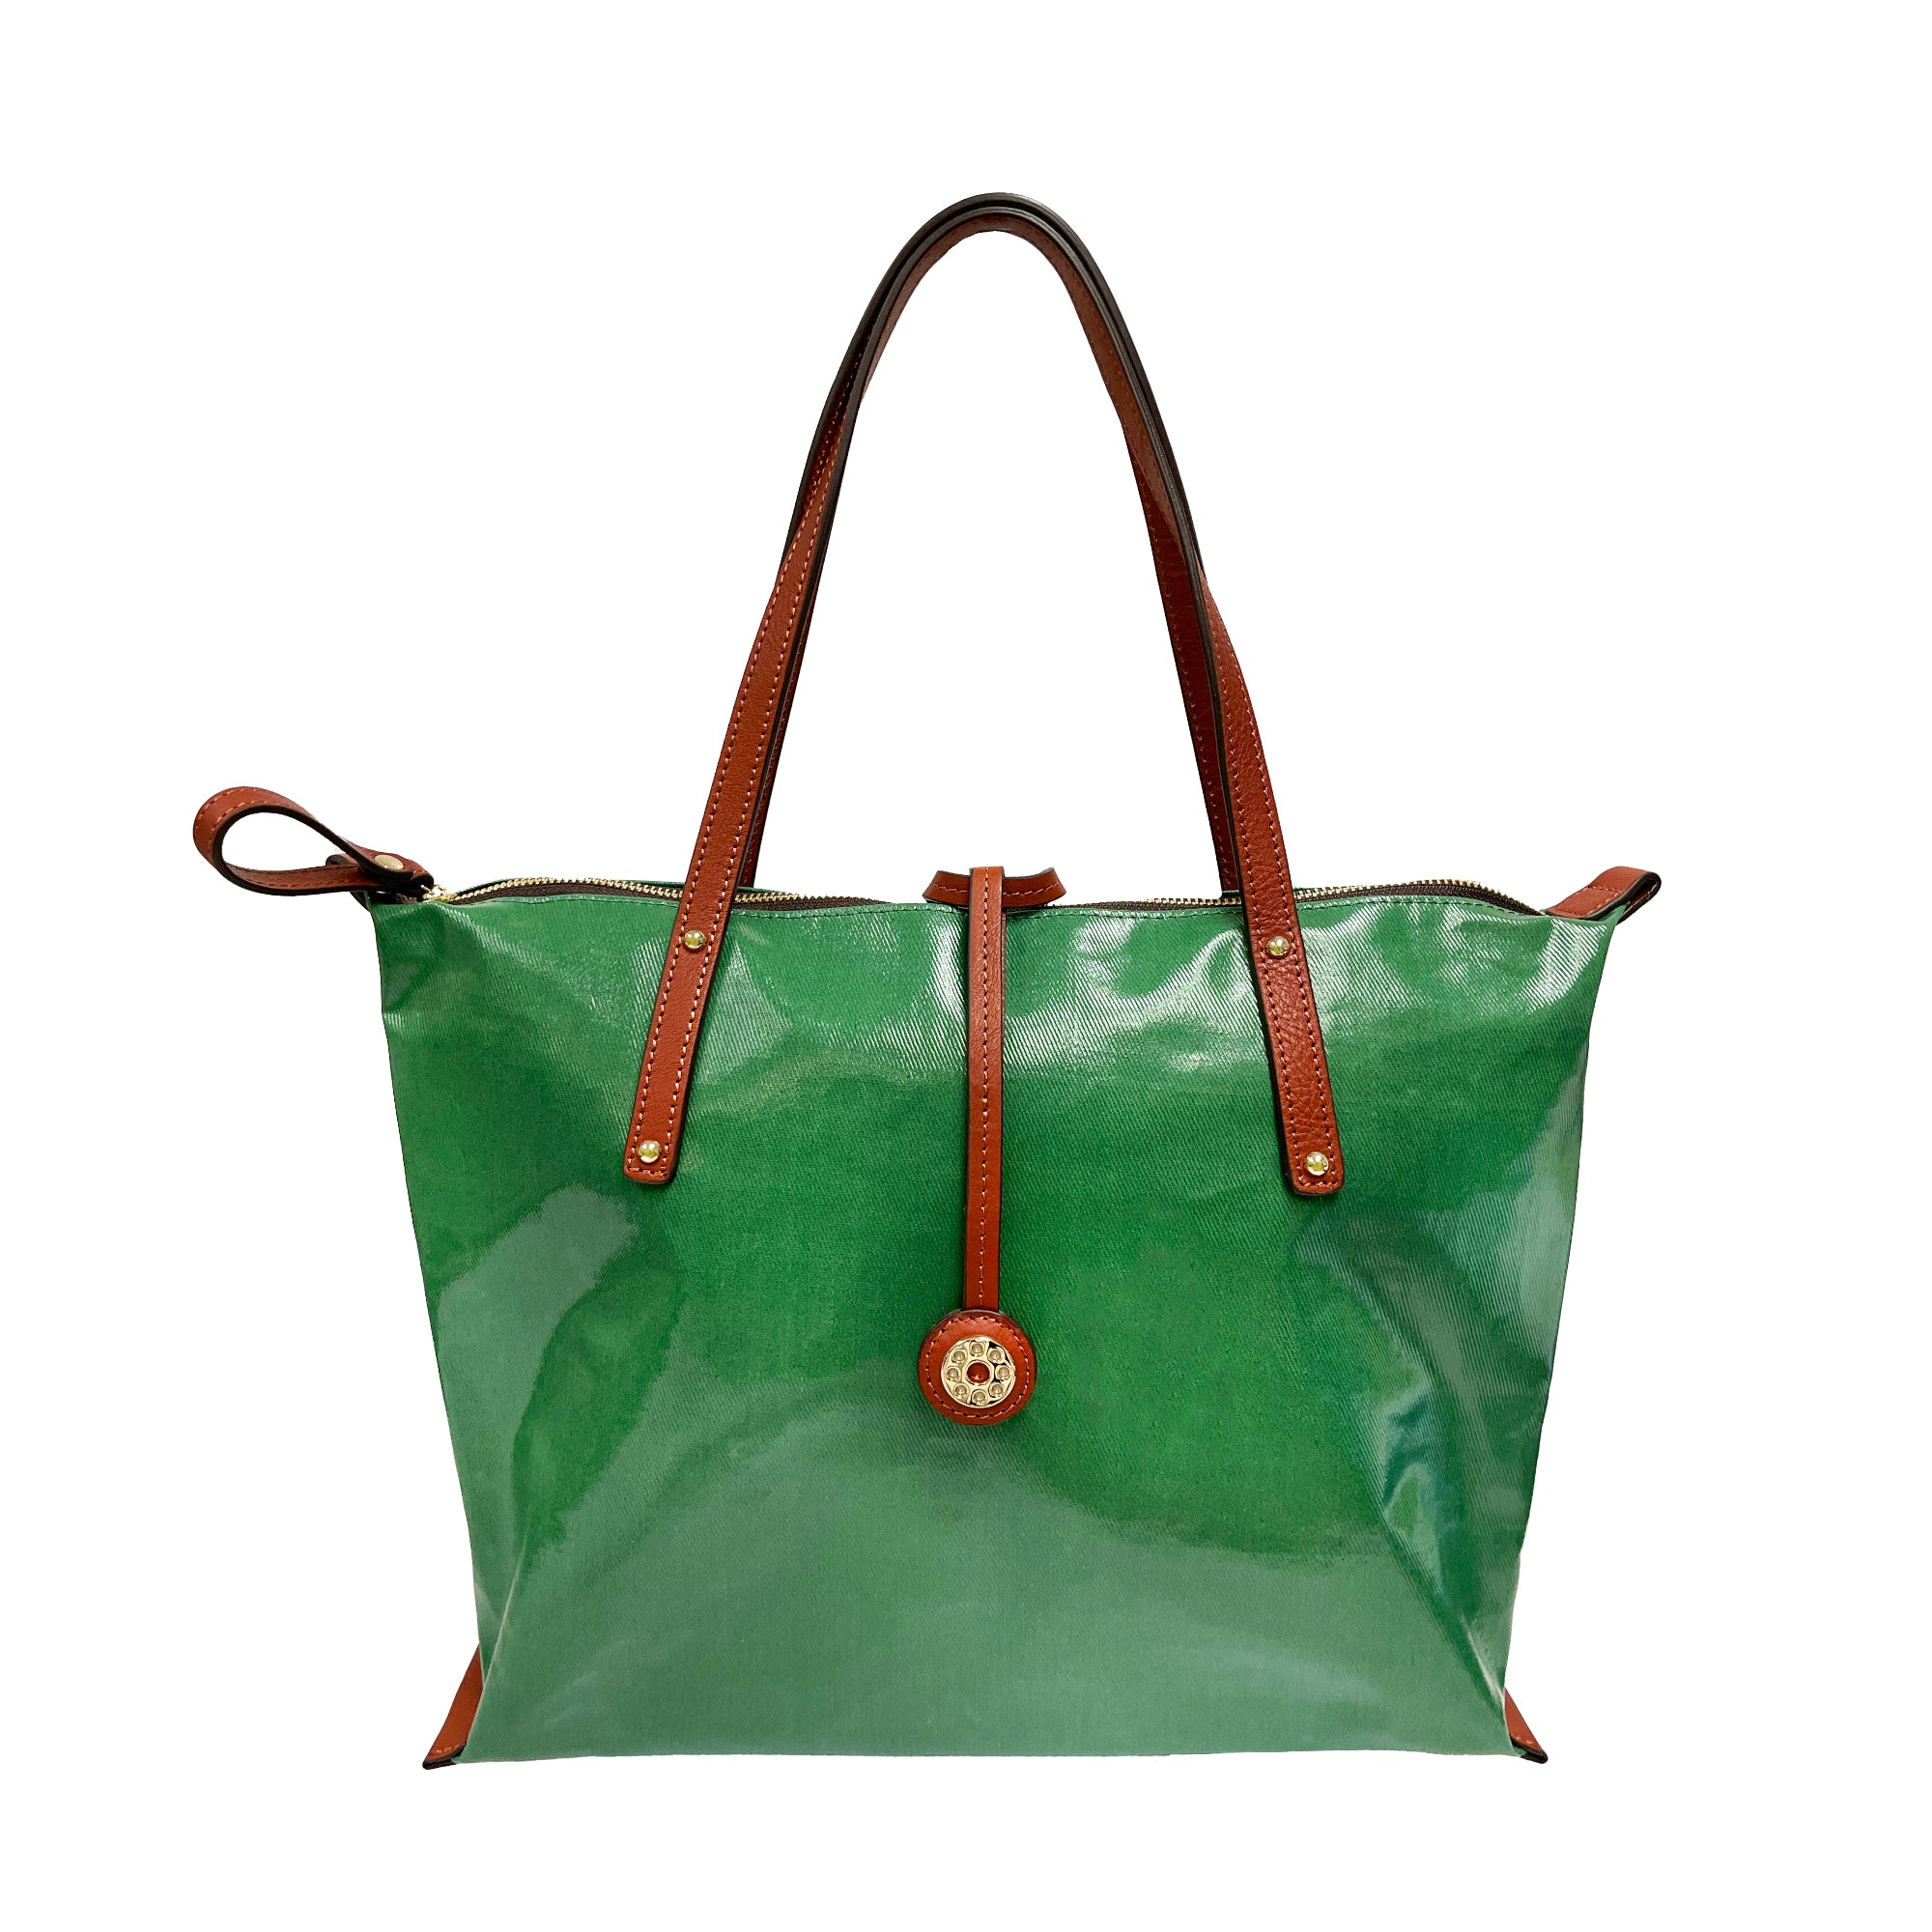 LIFE | Tote Bag - Candy